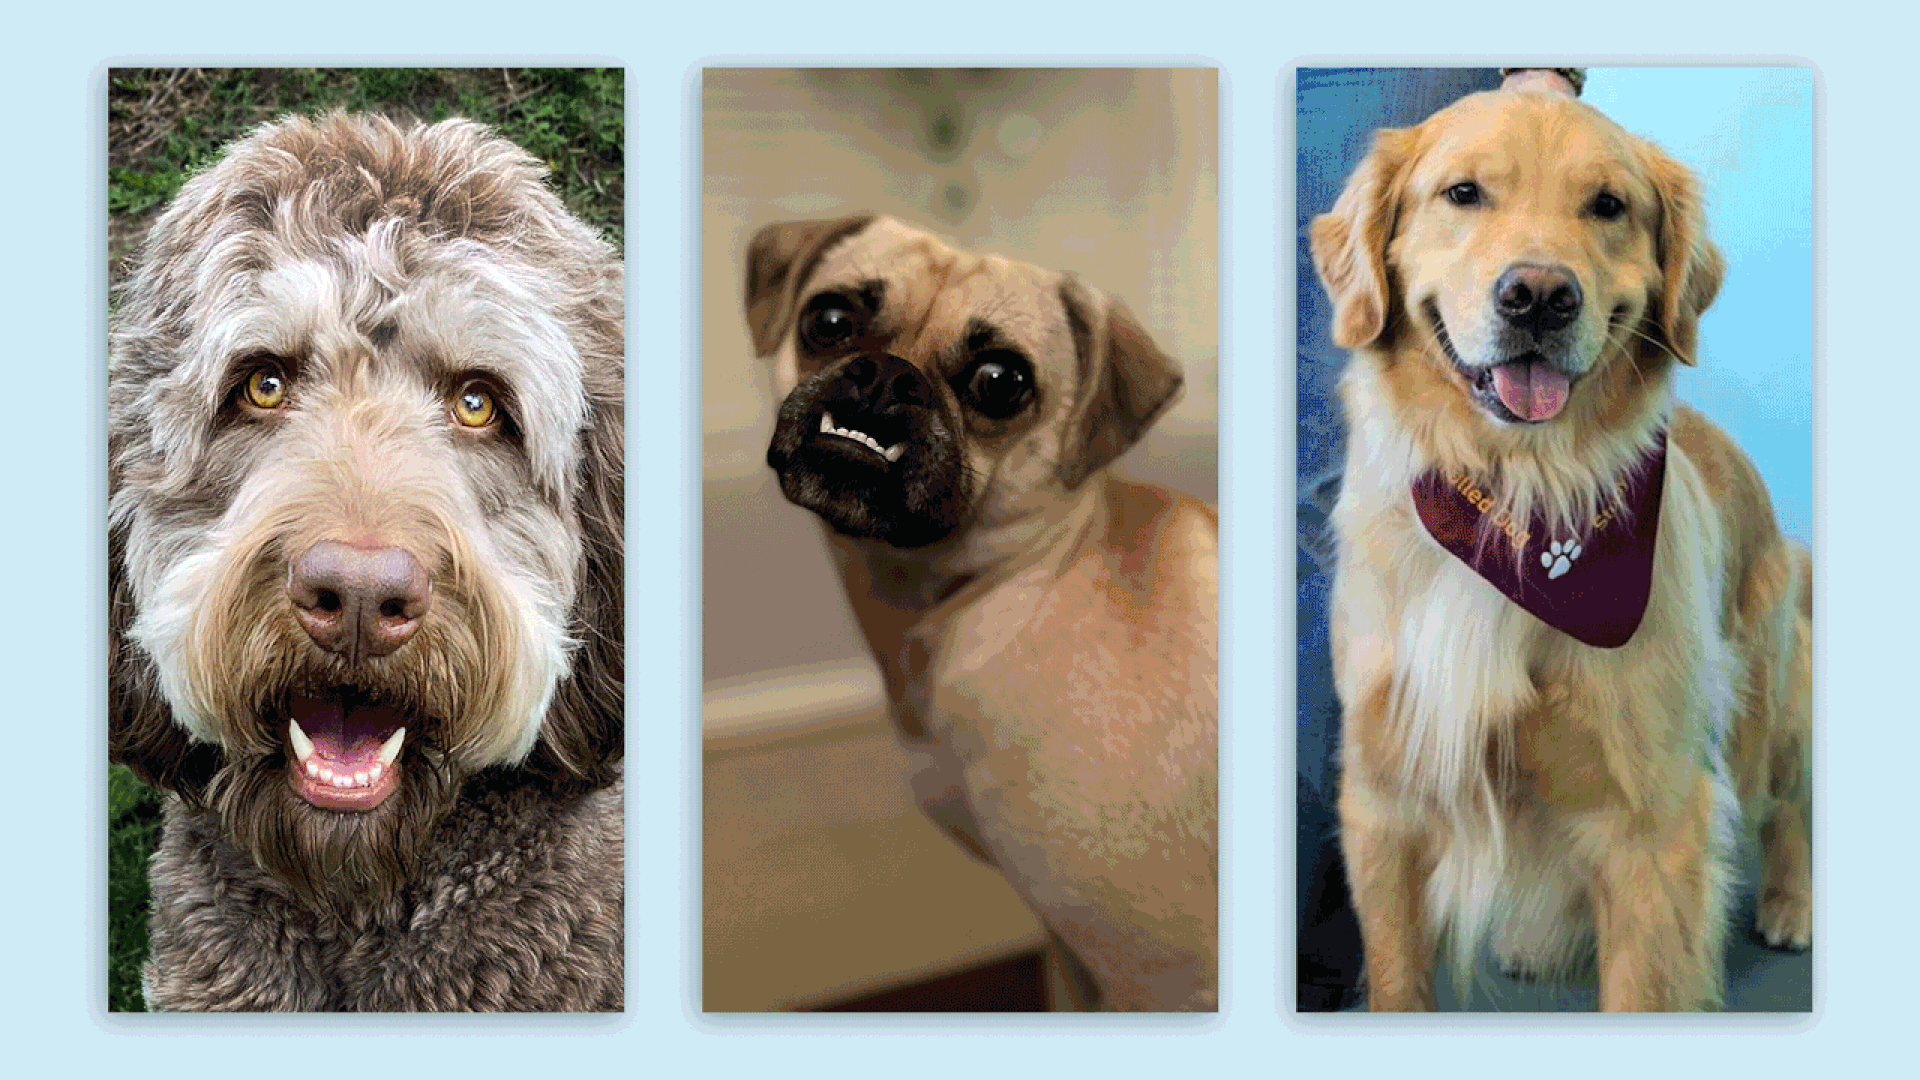 A gif of Axios Des Moines readers' dogs